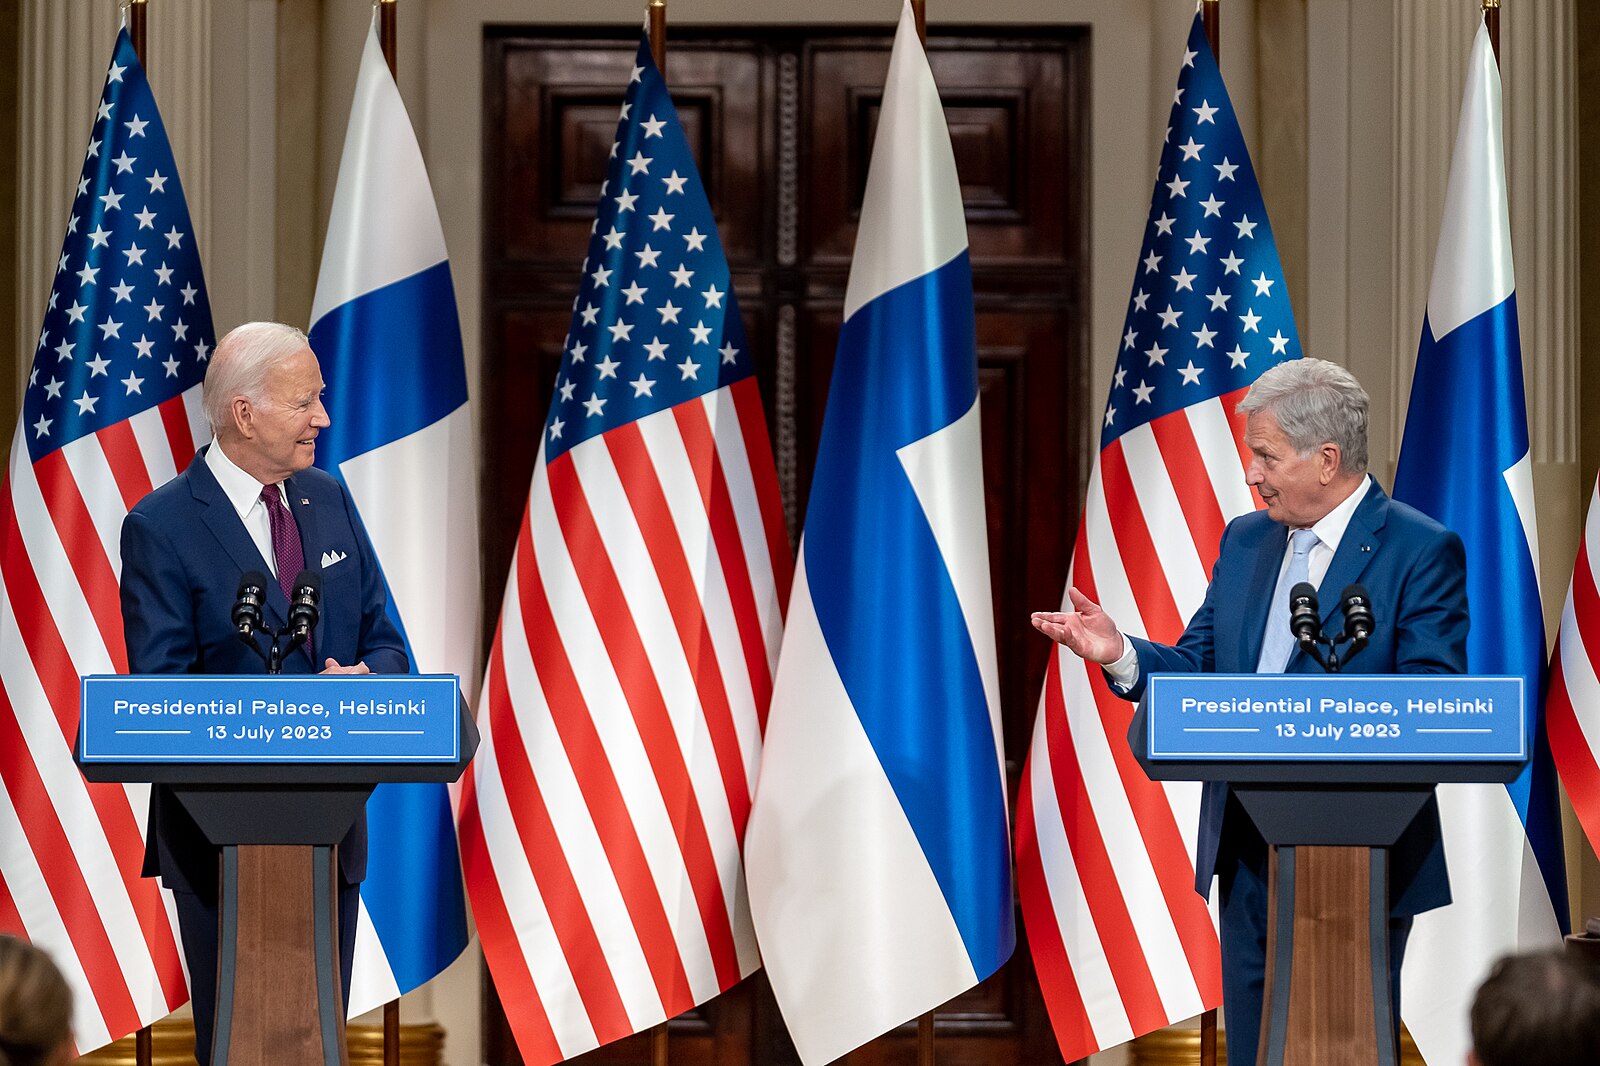 American President Biden and Finnish President Niinisto having a press conference in Helsinki in front of American and Finnish flags.